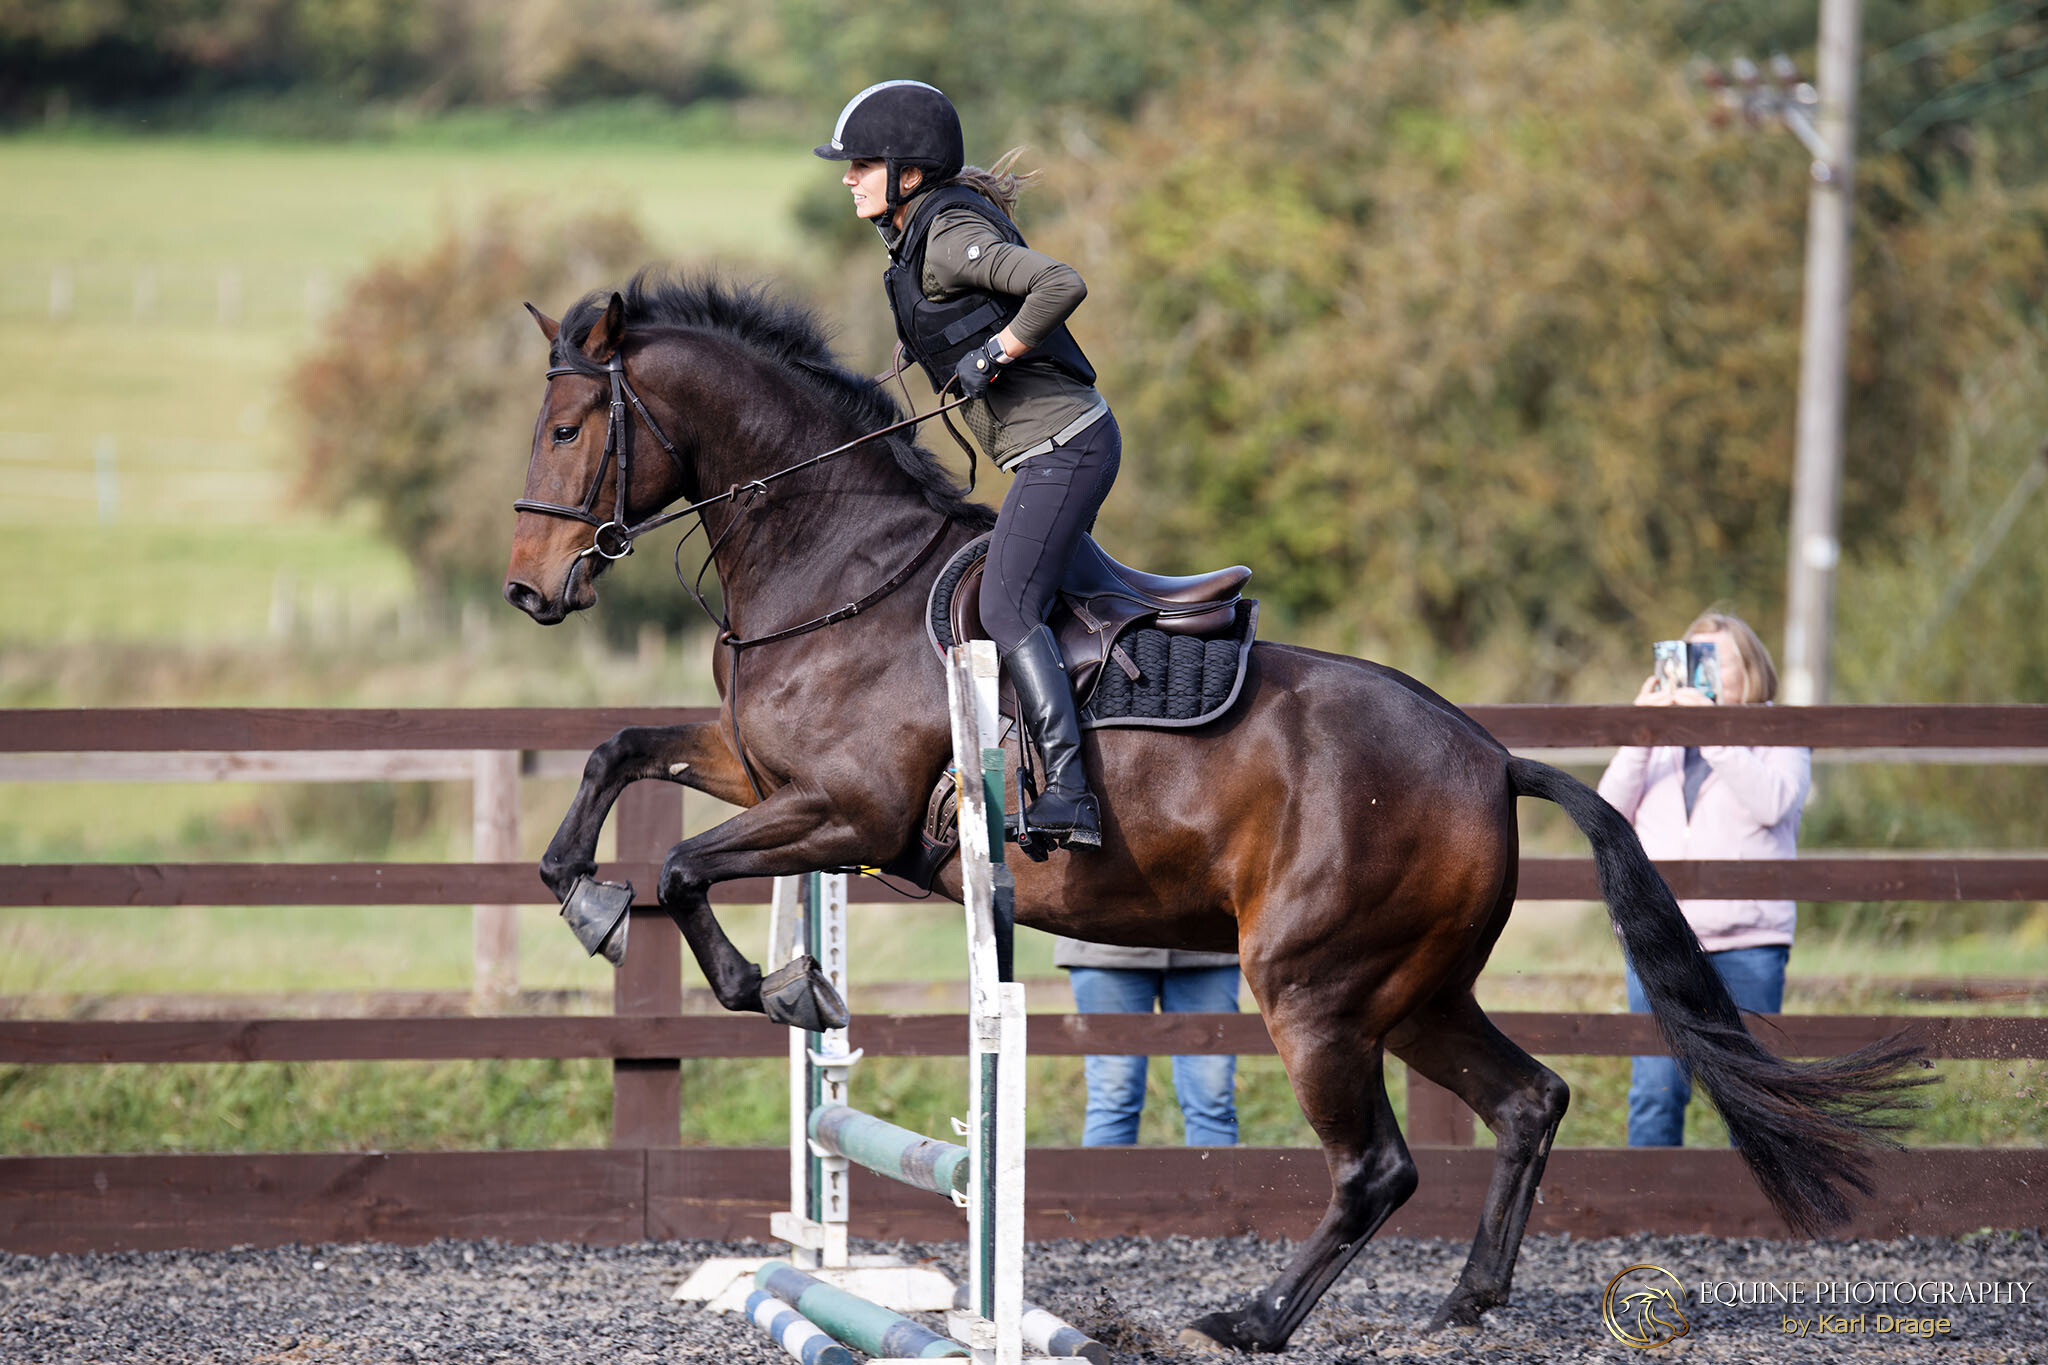 A horse and rider jump an obstacle during a Clear Round showjumping session at Boughton Mill Equestrian Centre